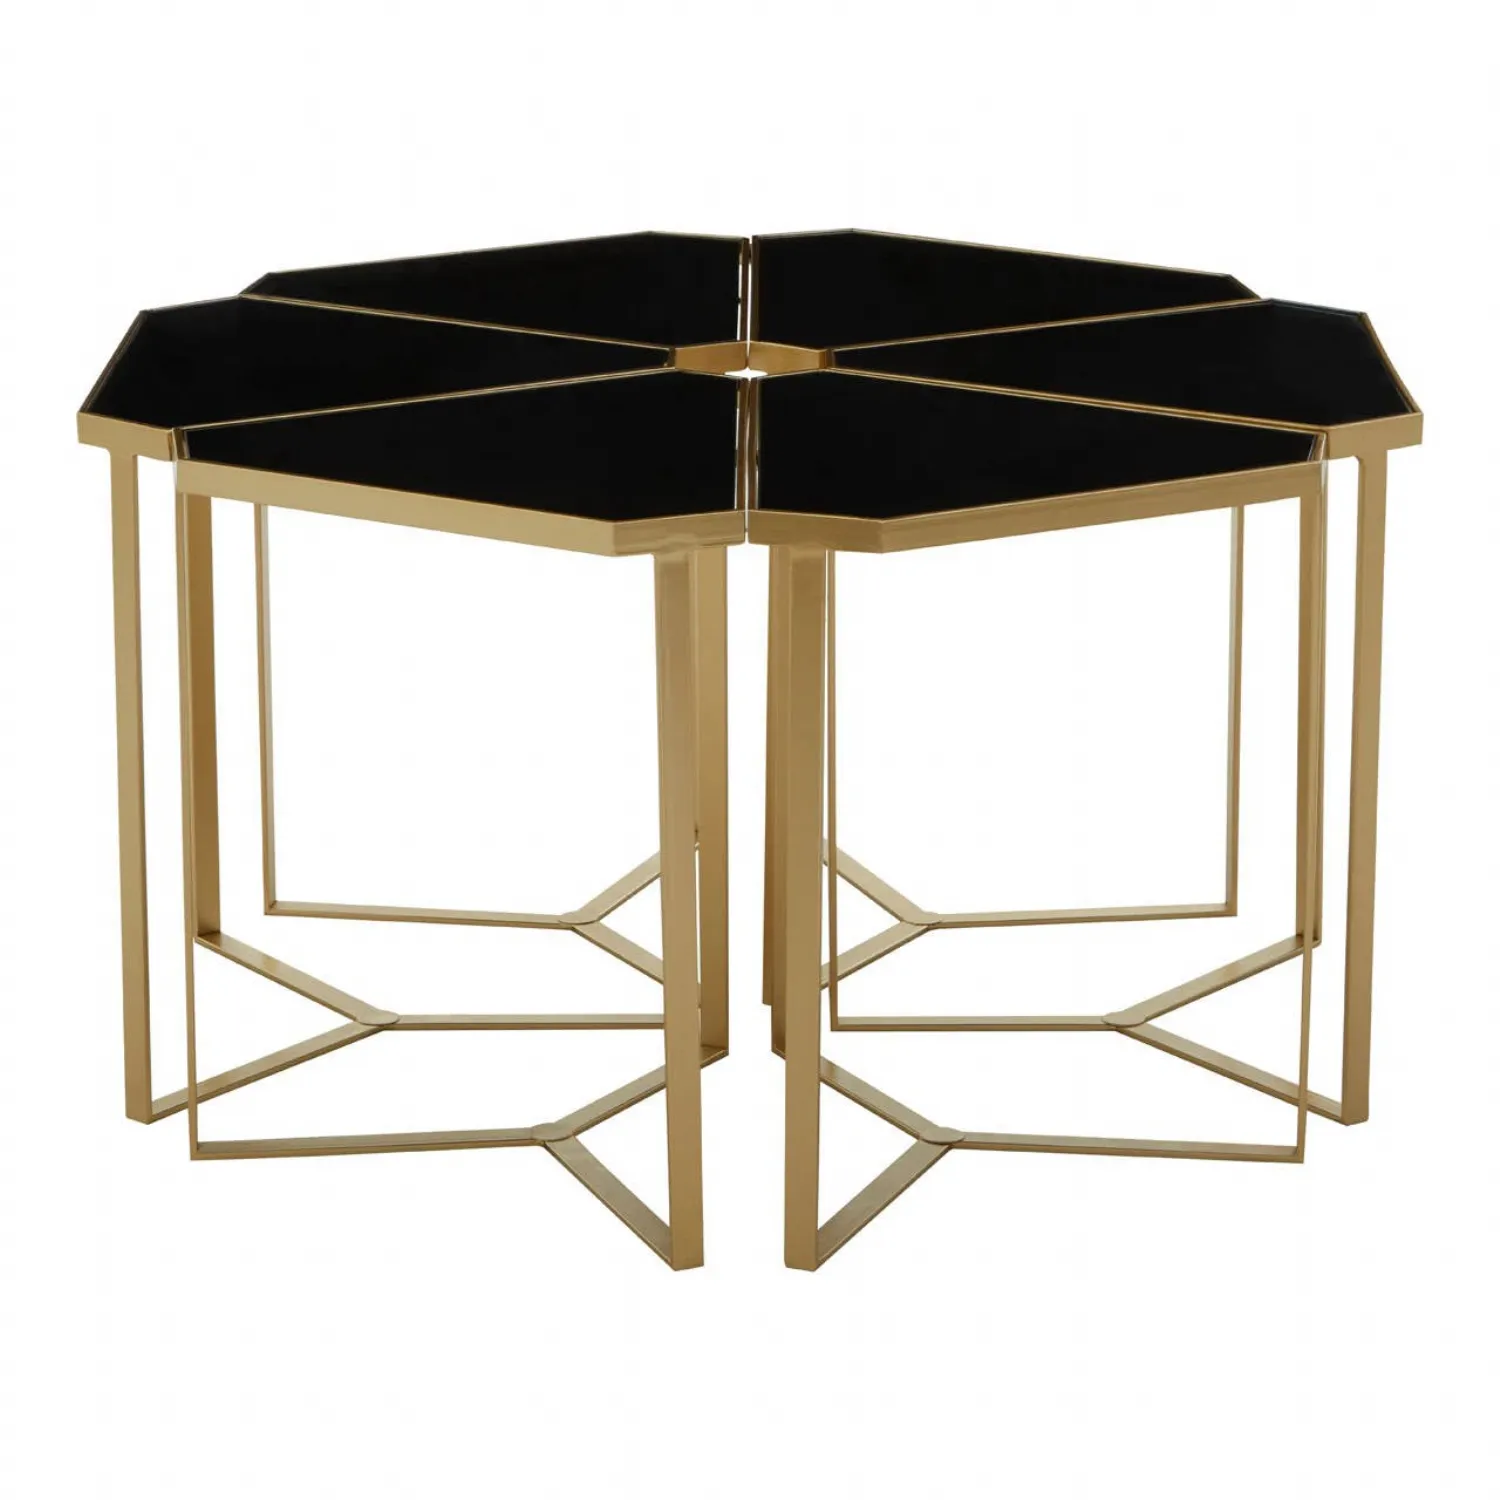 Jodie Six Piece Black Top And Gold Frame Table Set